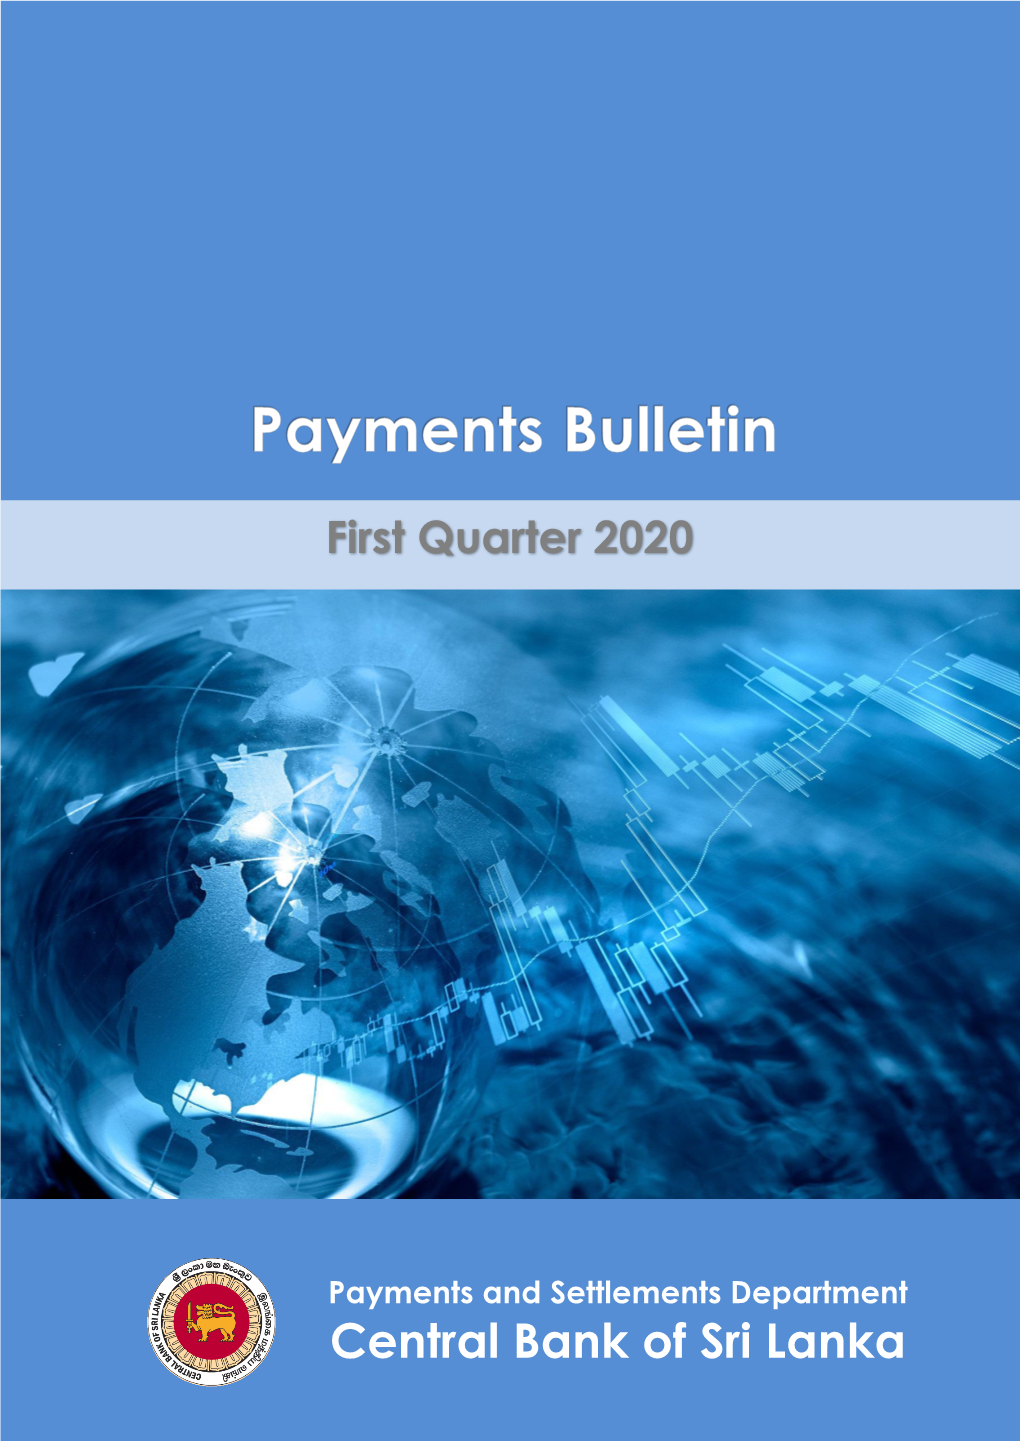 Payments Bulletin - First Quarter 2020 Page 1